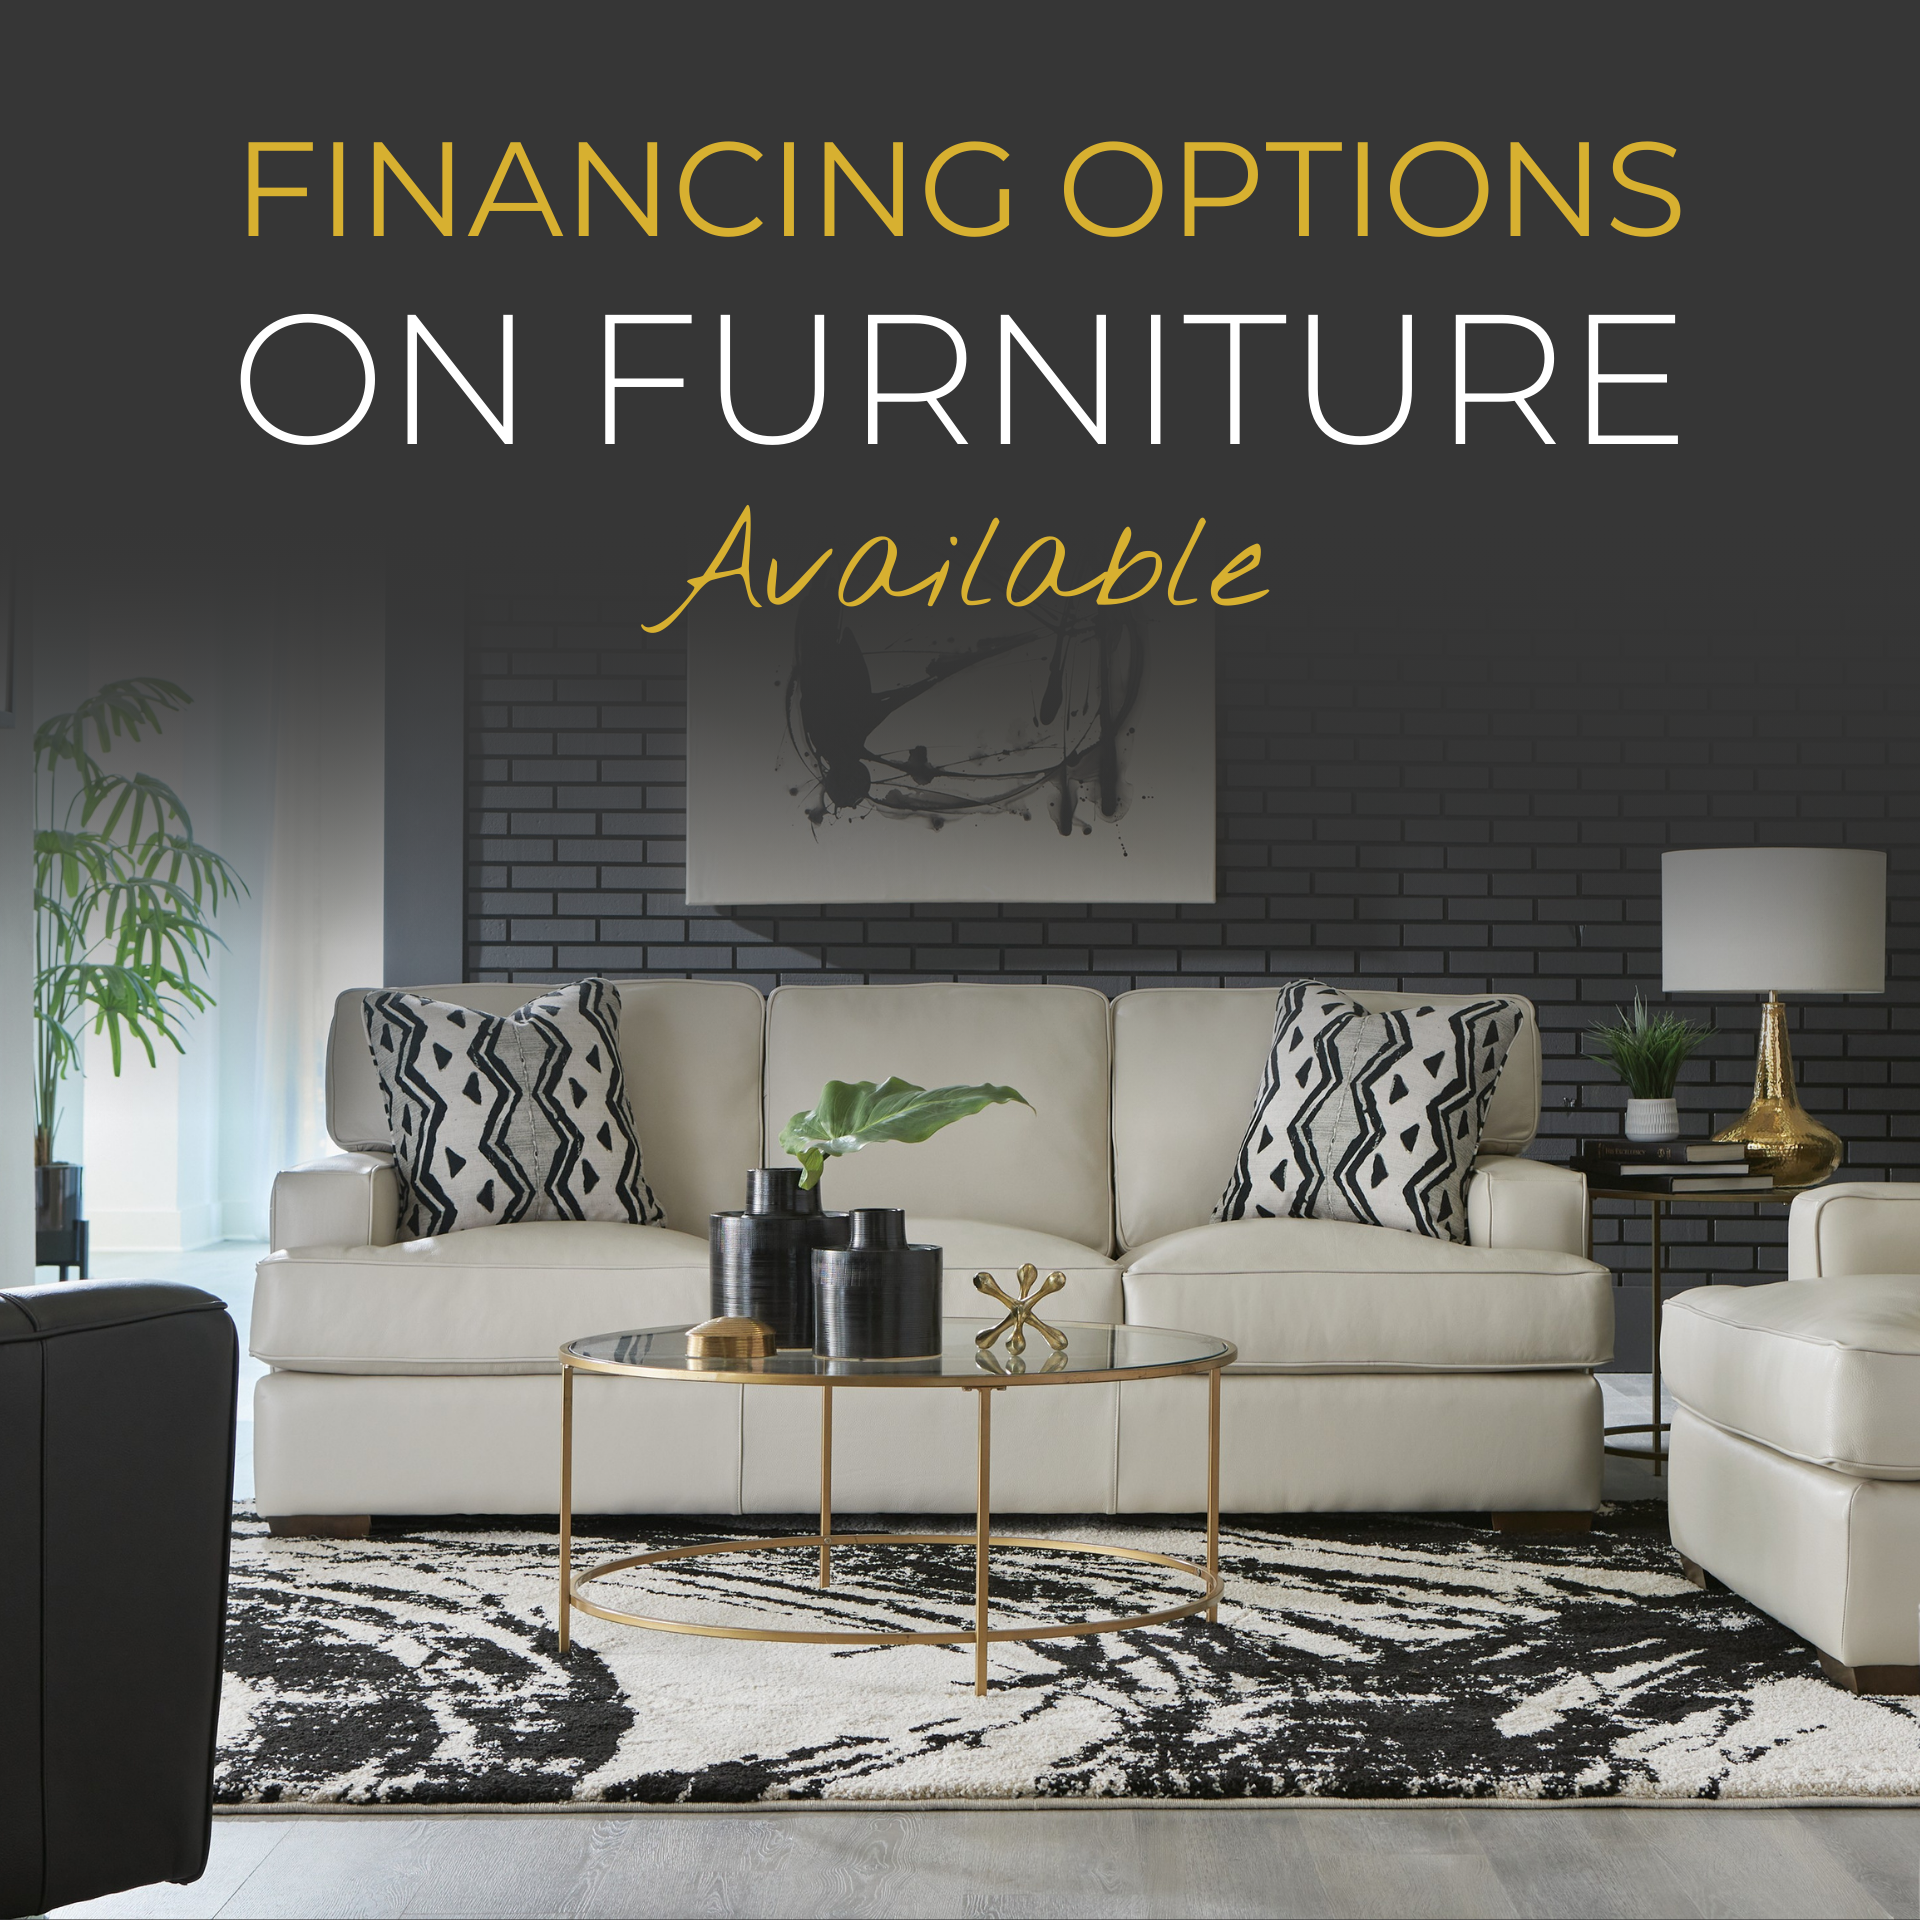 https://d12mivgeuoigbq.cloudfront.net/magento-media/members/bcol1-colders/New_Years_Furniture_Financing2.png